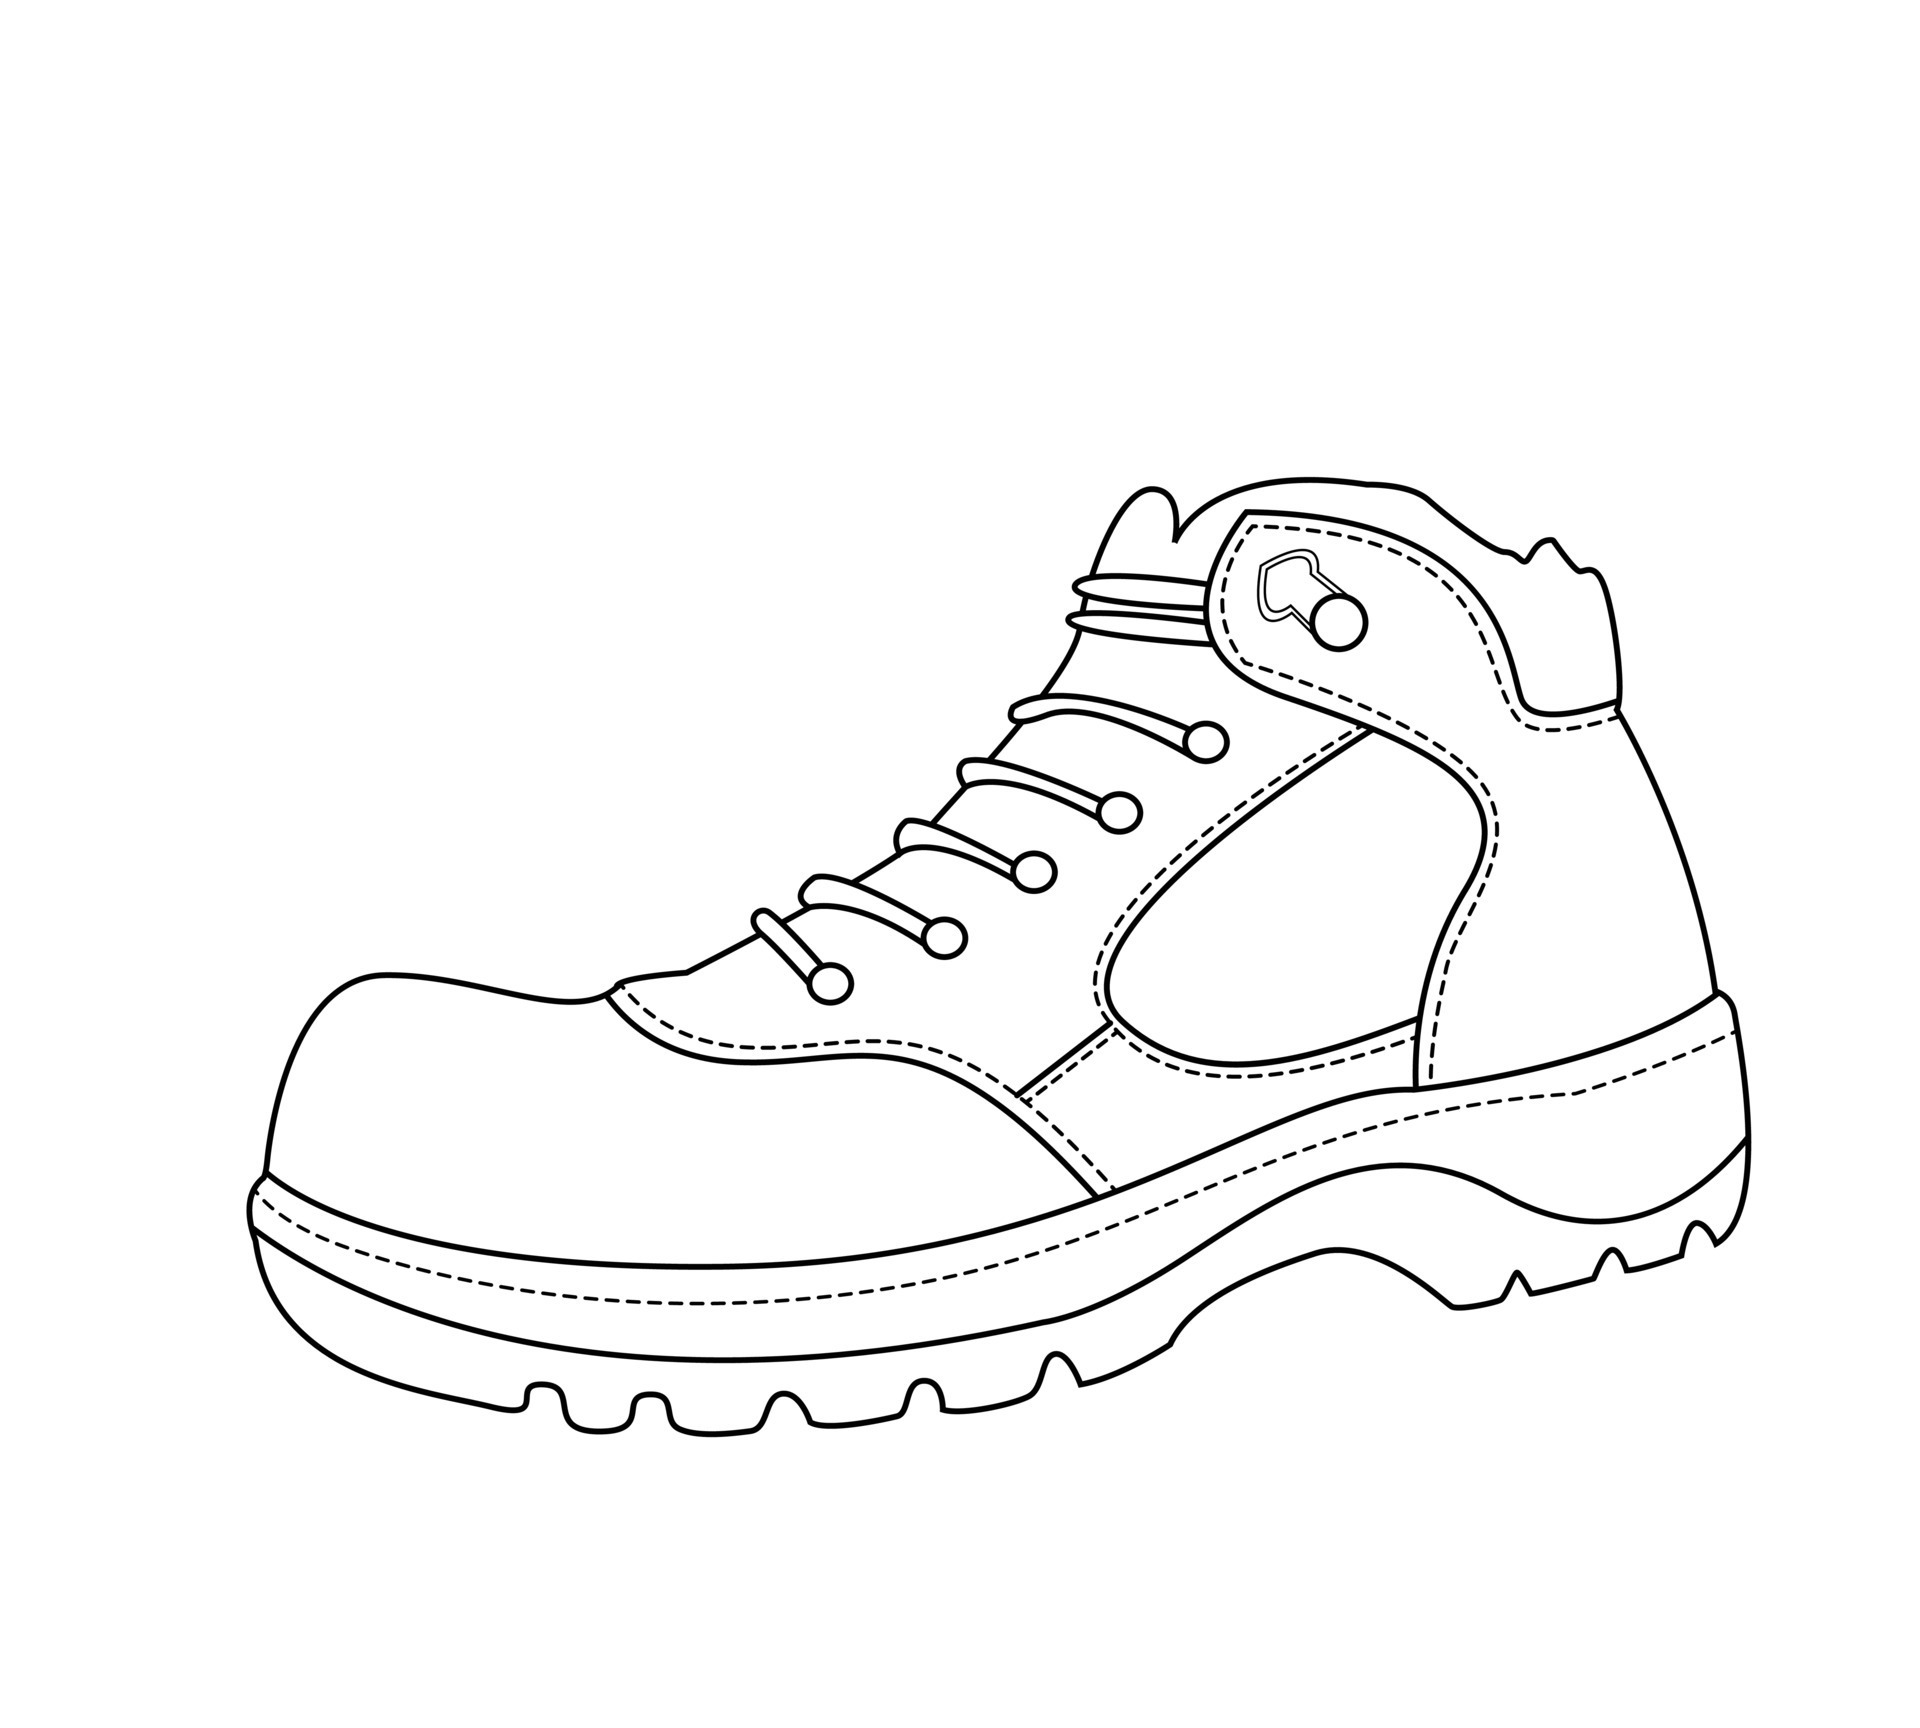 Safety shoes. Personal protective equipment for workers. Vector doodle ...